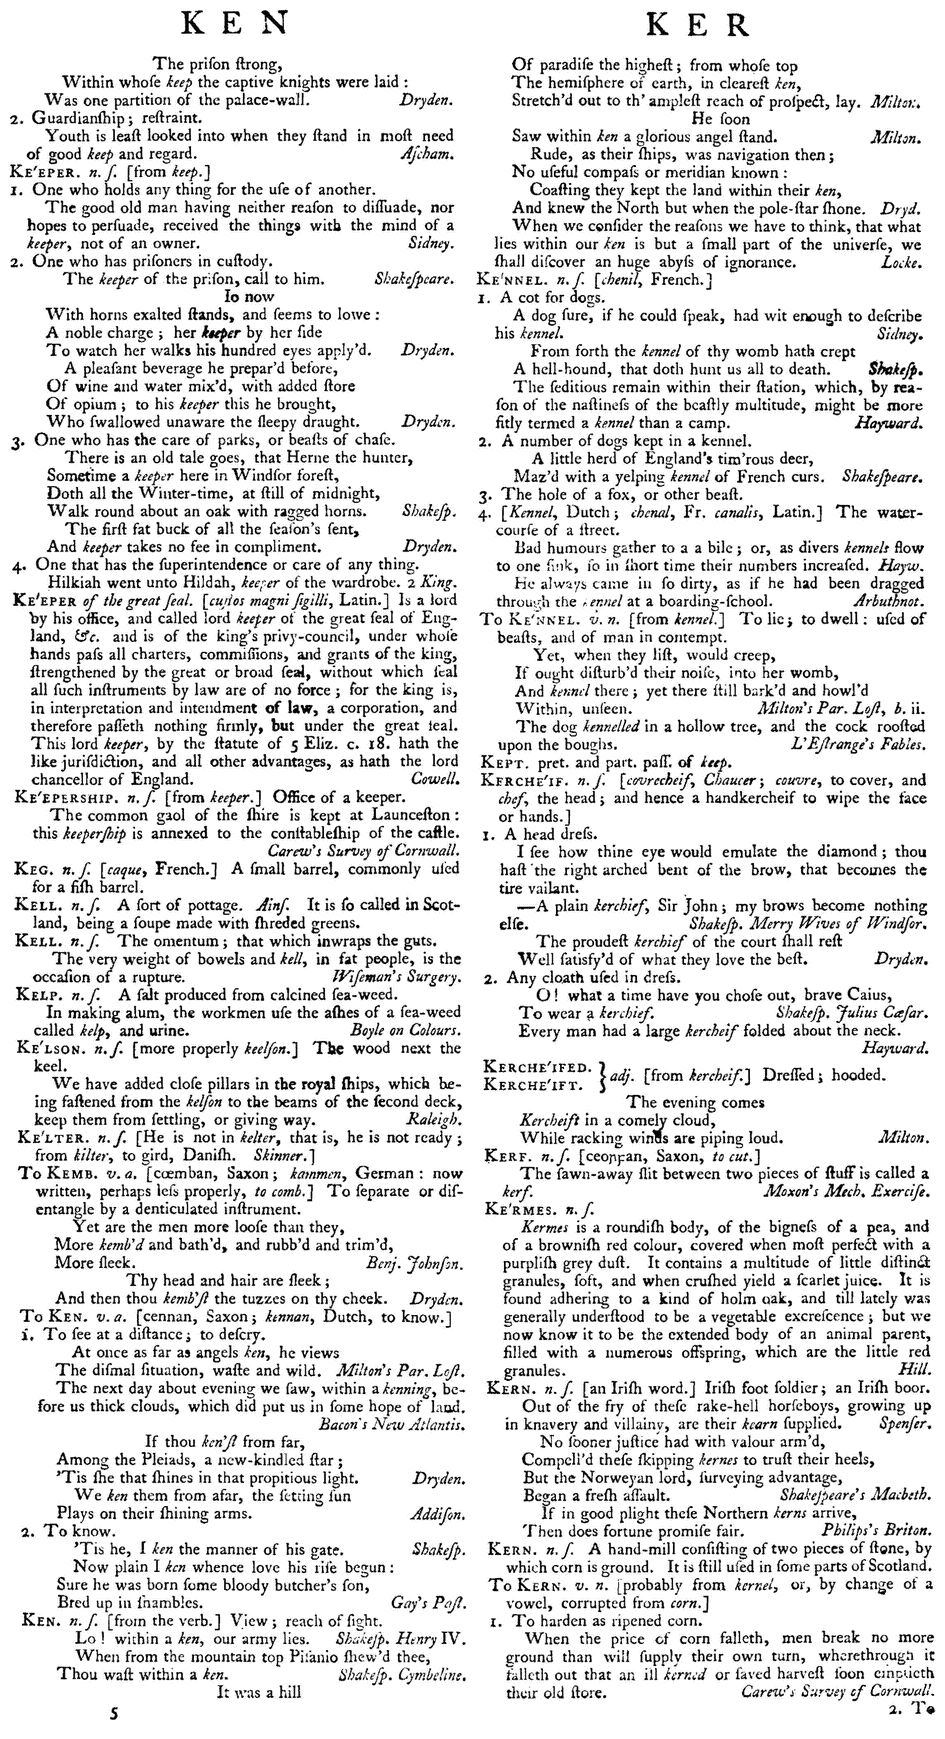 Page 1148 (A Dictionary of the English Language).gif